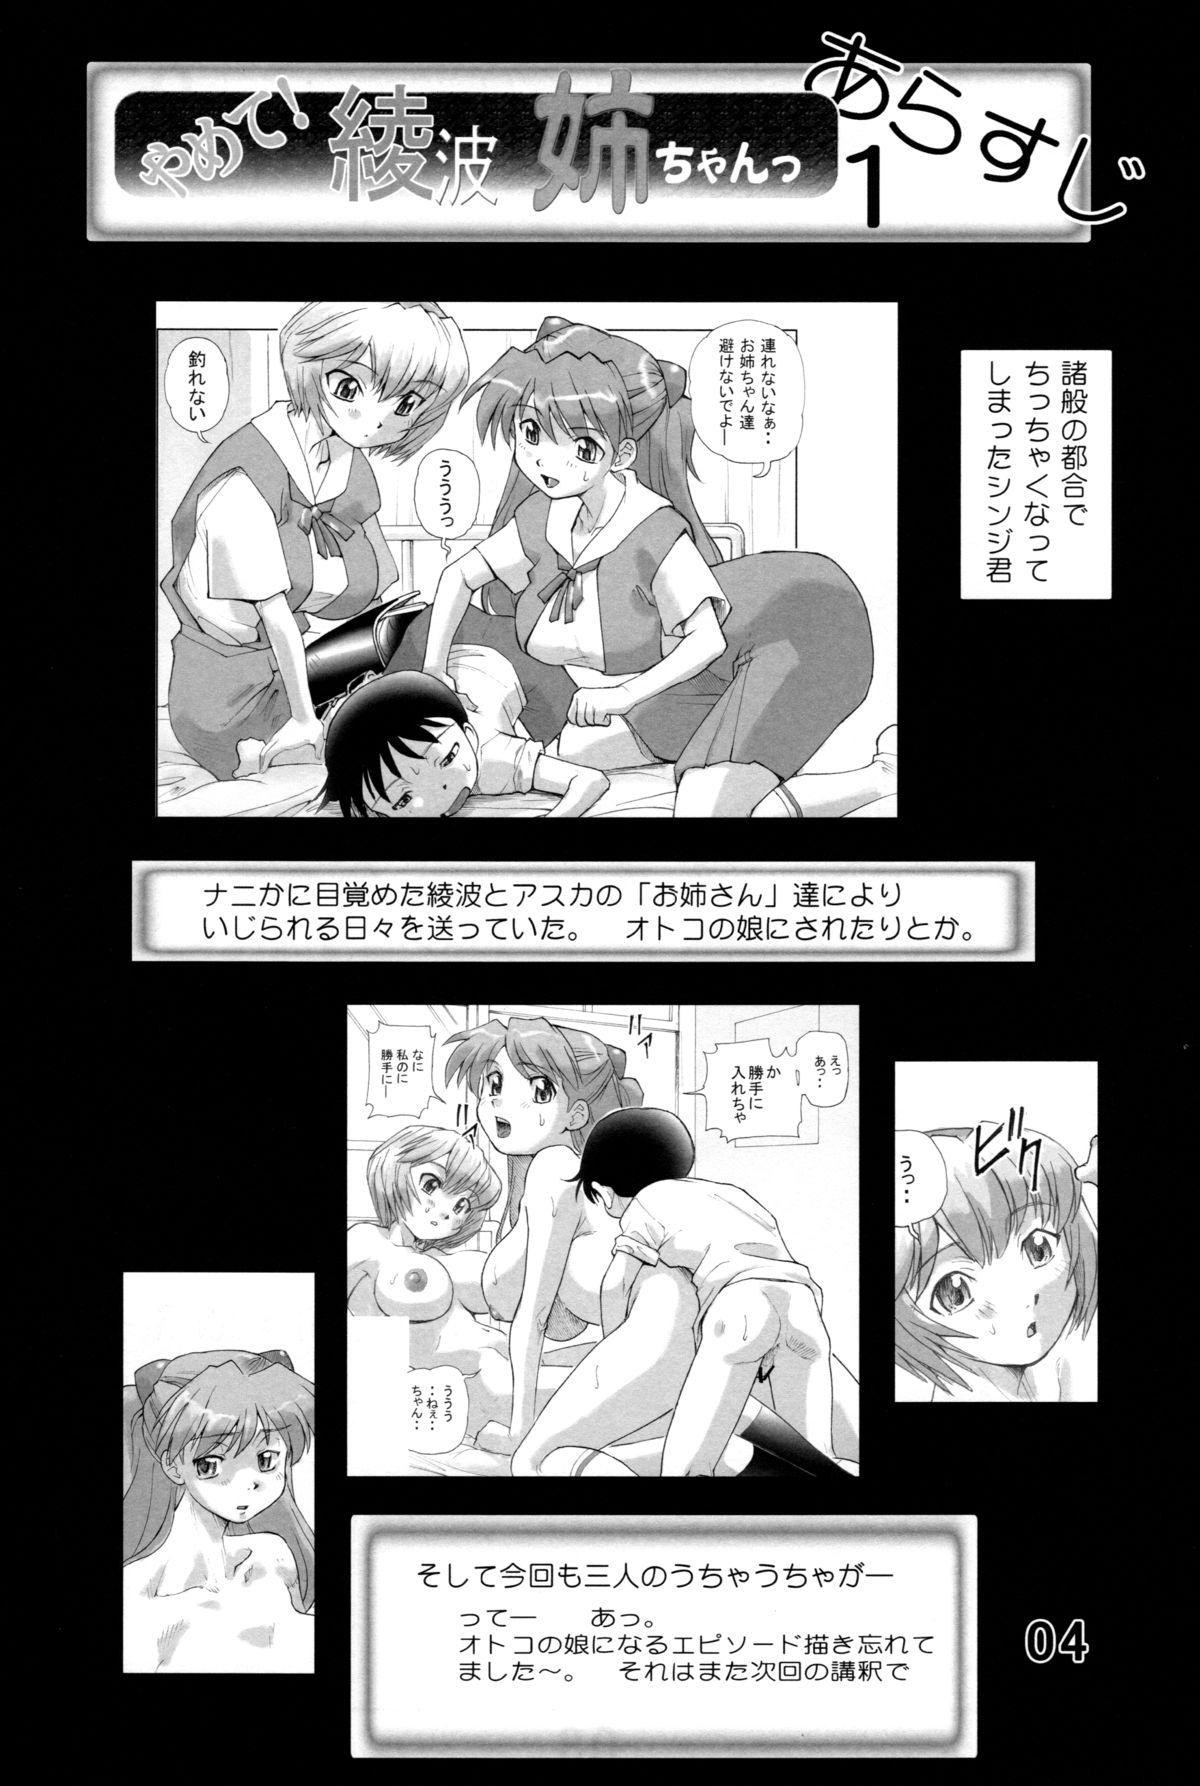 Chicks Yamete! Ayanami Nee-chan 2 - Neon genesis evangelion Bed - Page 4